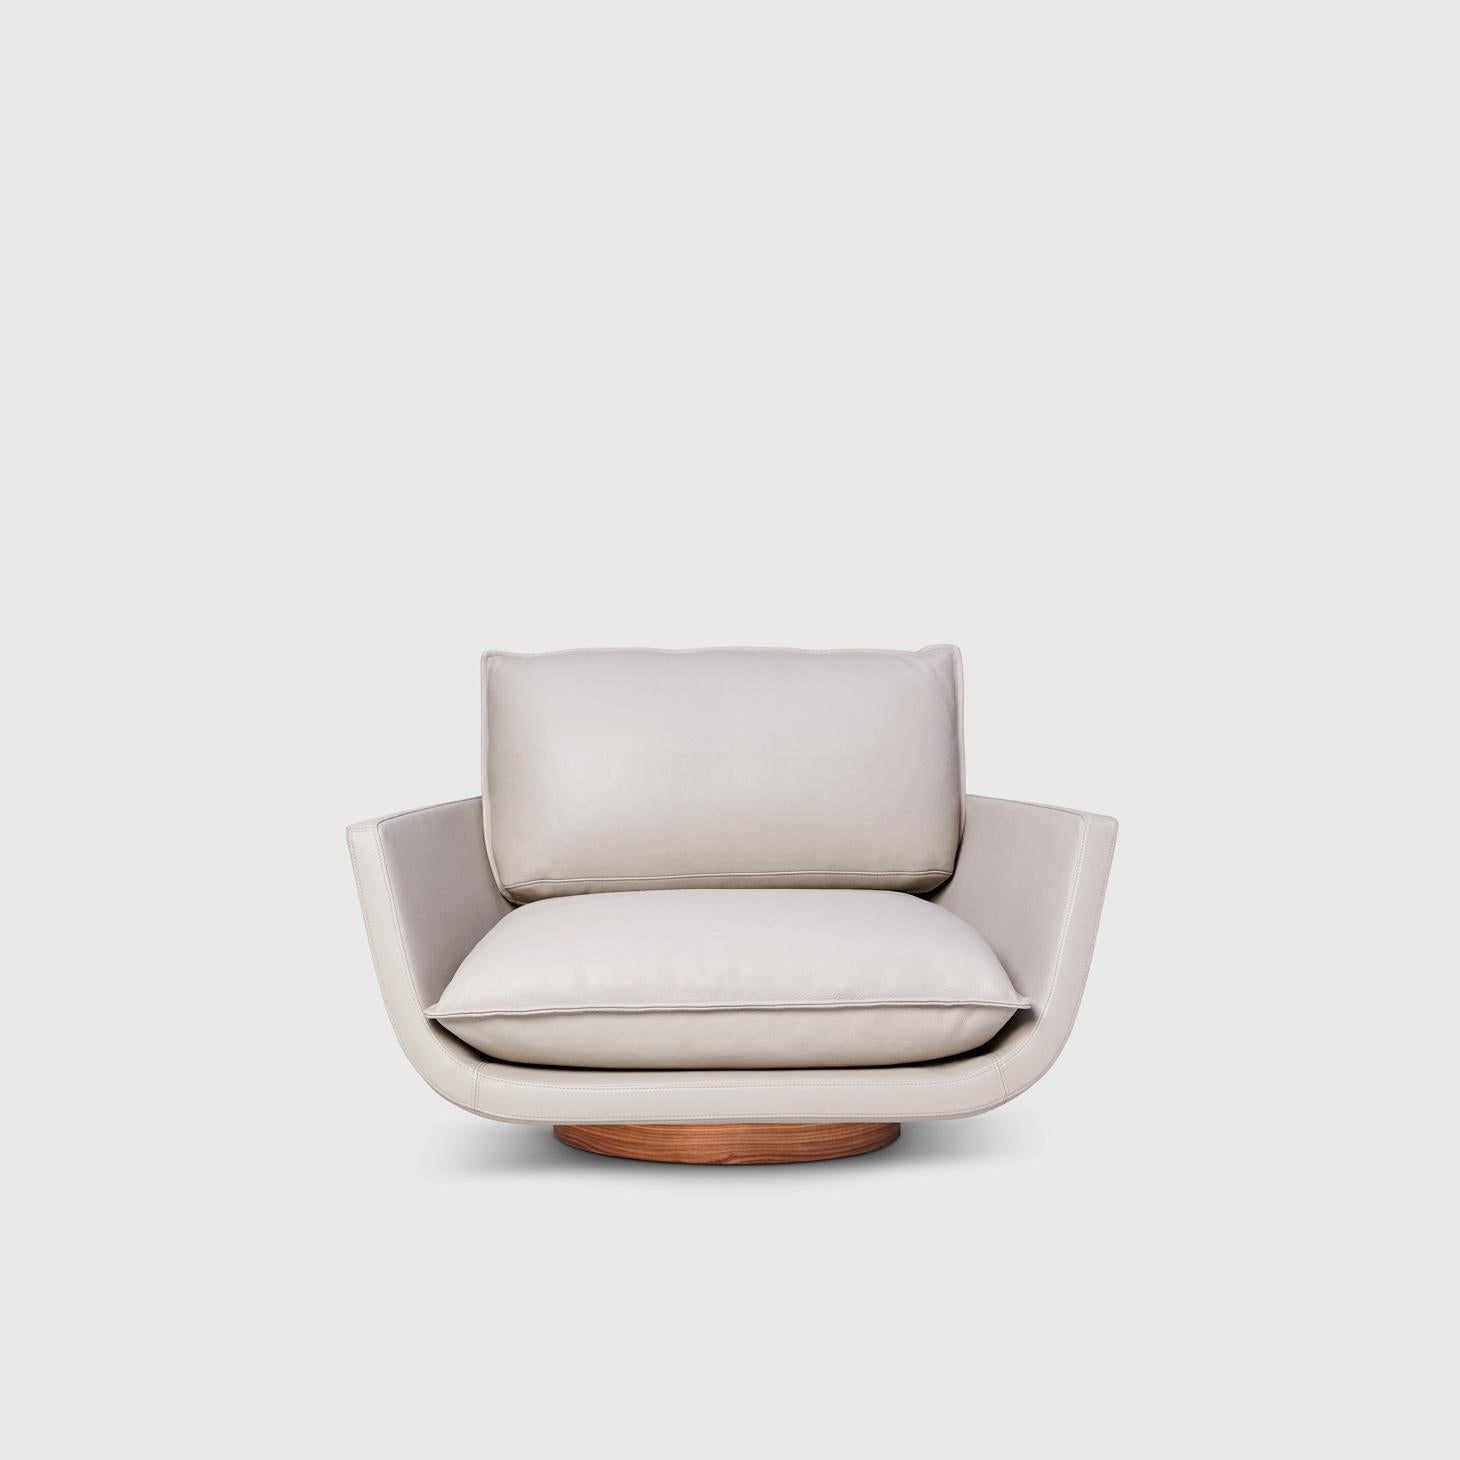 Contemporary Rua Ipanema Lounge Chair by Yabu Pushelberg with Client's Own Material  For Sale